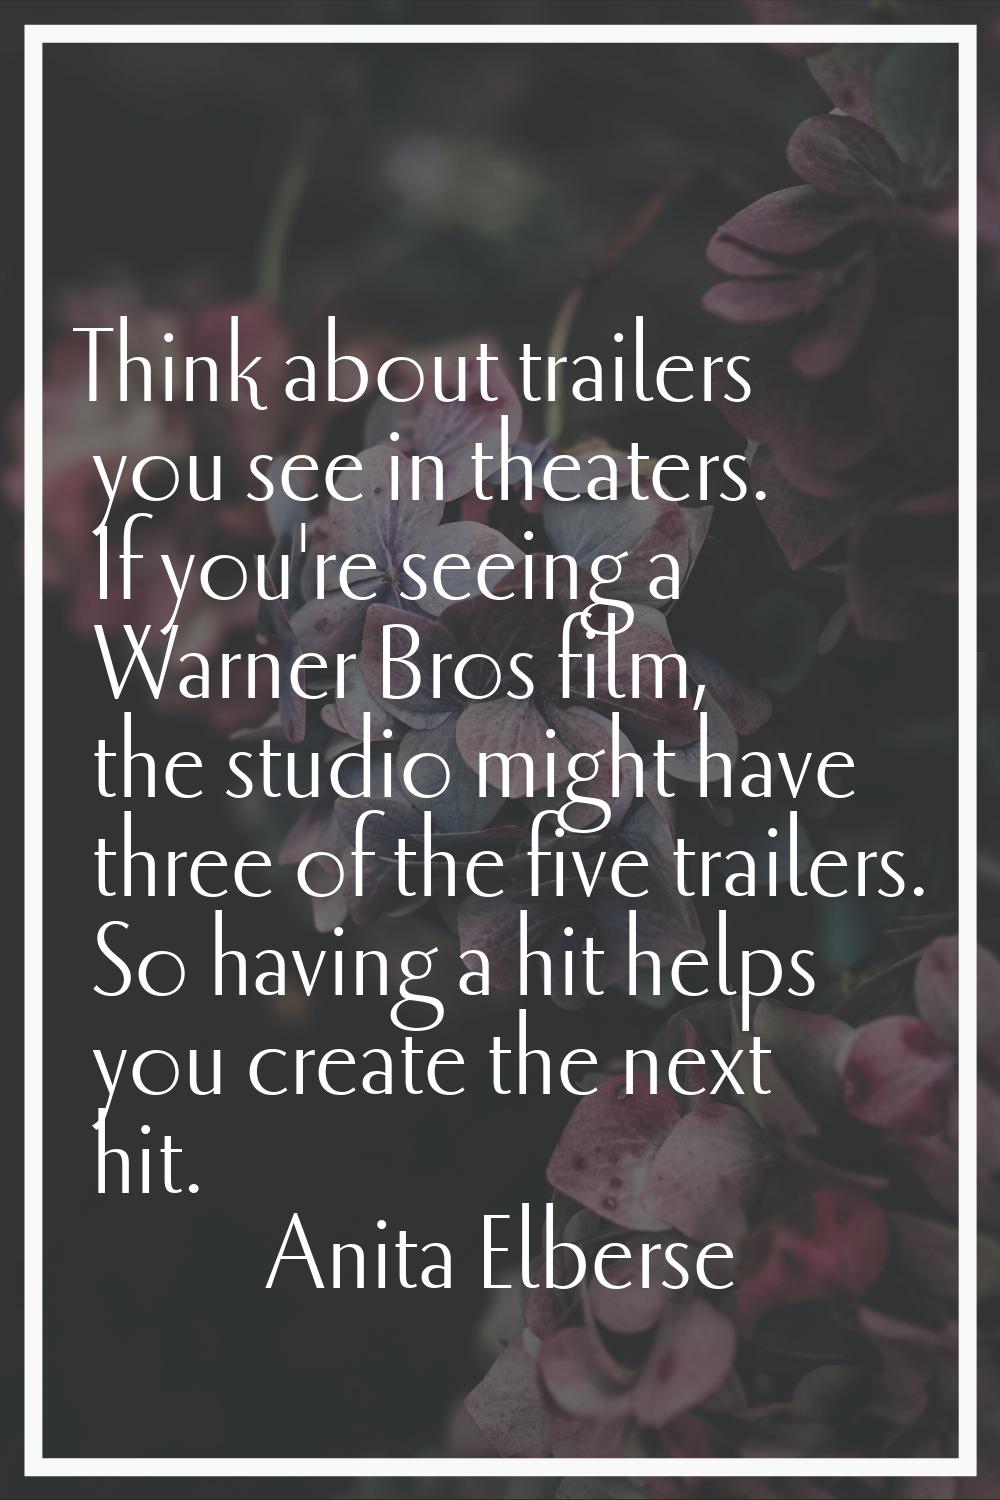 Think about trailers you see in theaters. If you're seeing a Warner Bros film, the studio might hav